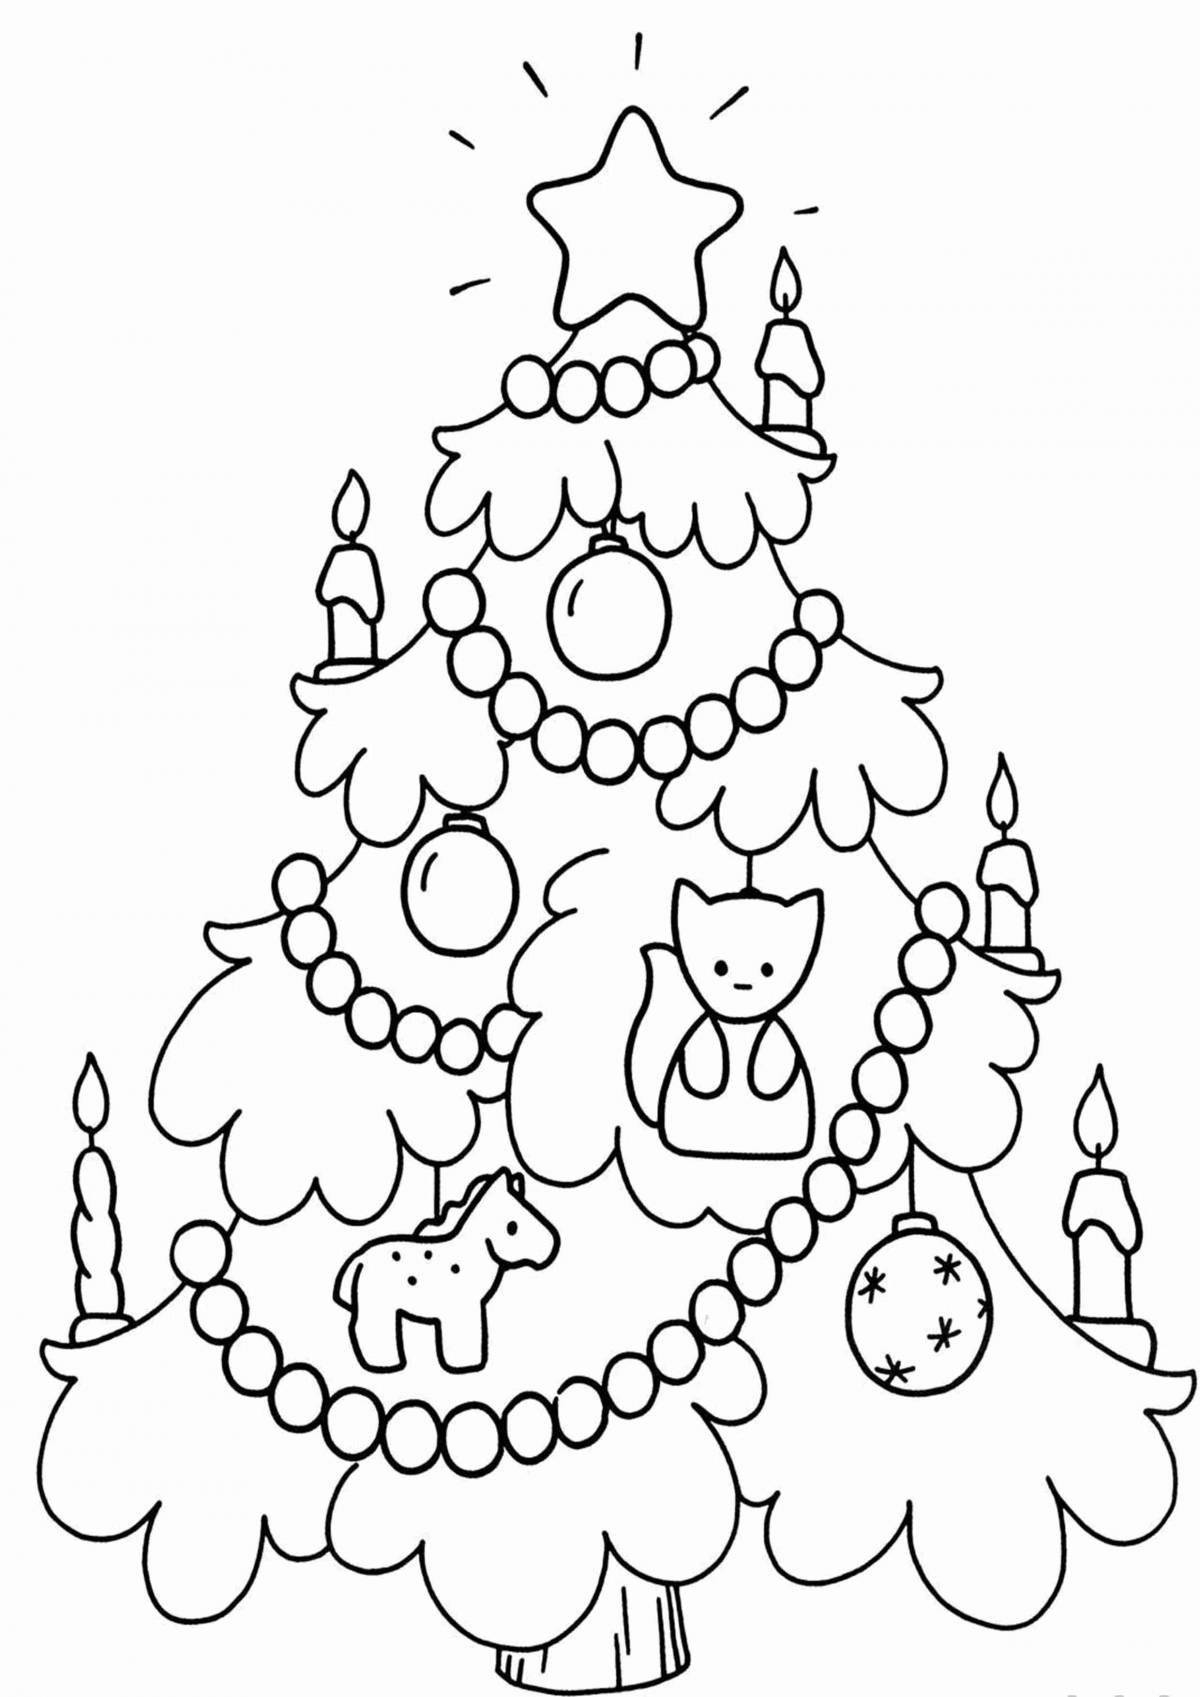 Impressive Christmas coloring book for kids